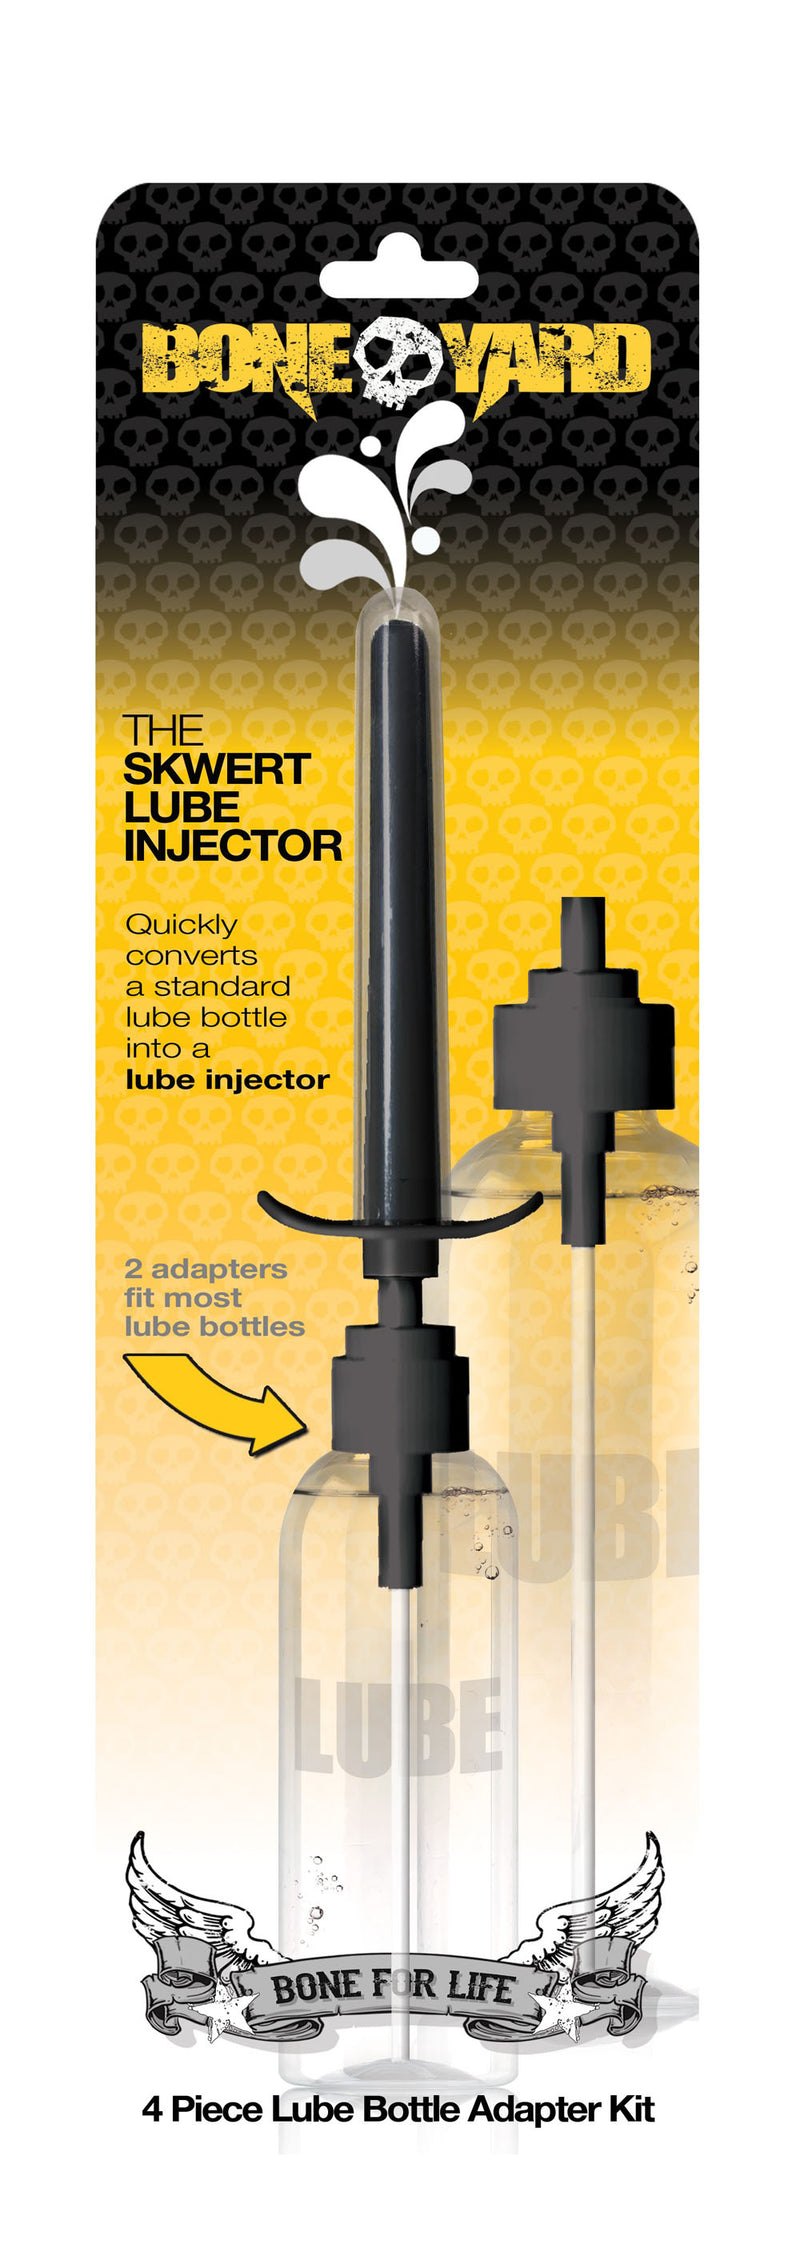 Get Ready for Hotter Intimate Moments with Skwert Lube Injector - Safe, Hypoallergenic, and Mess-Free!